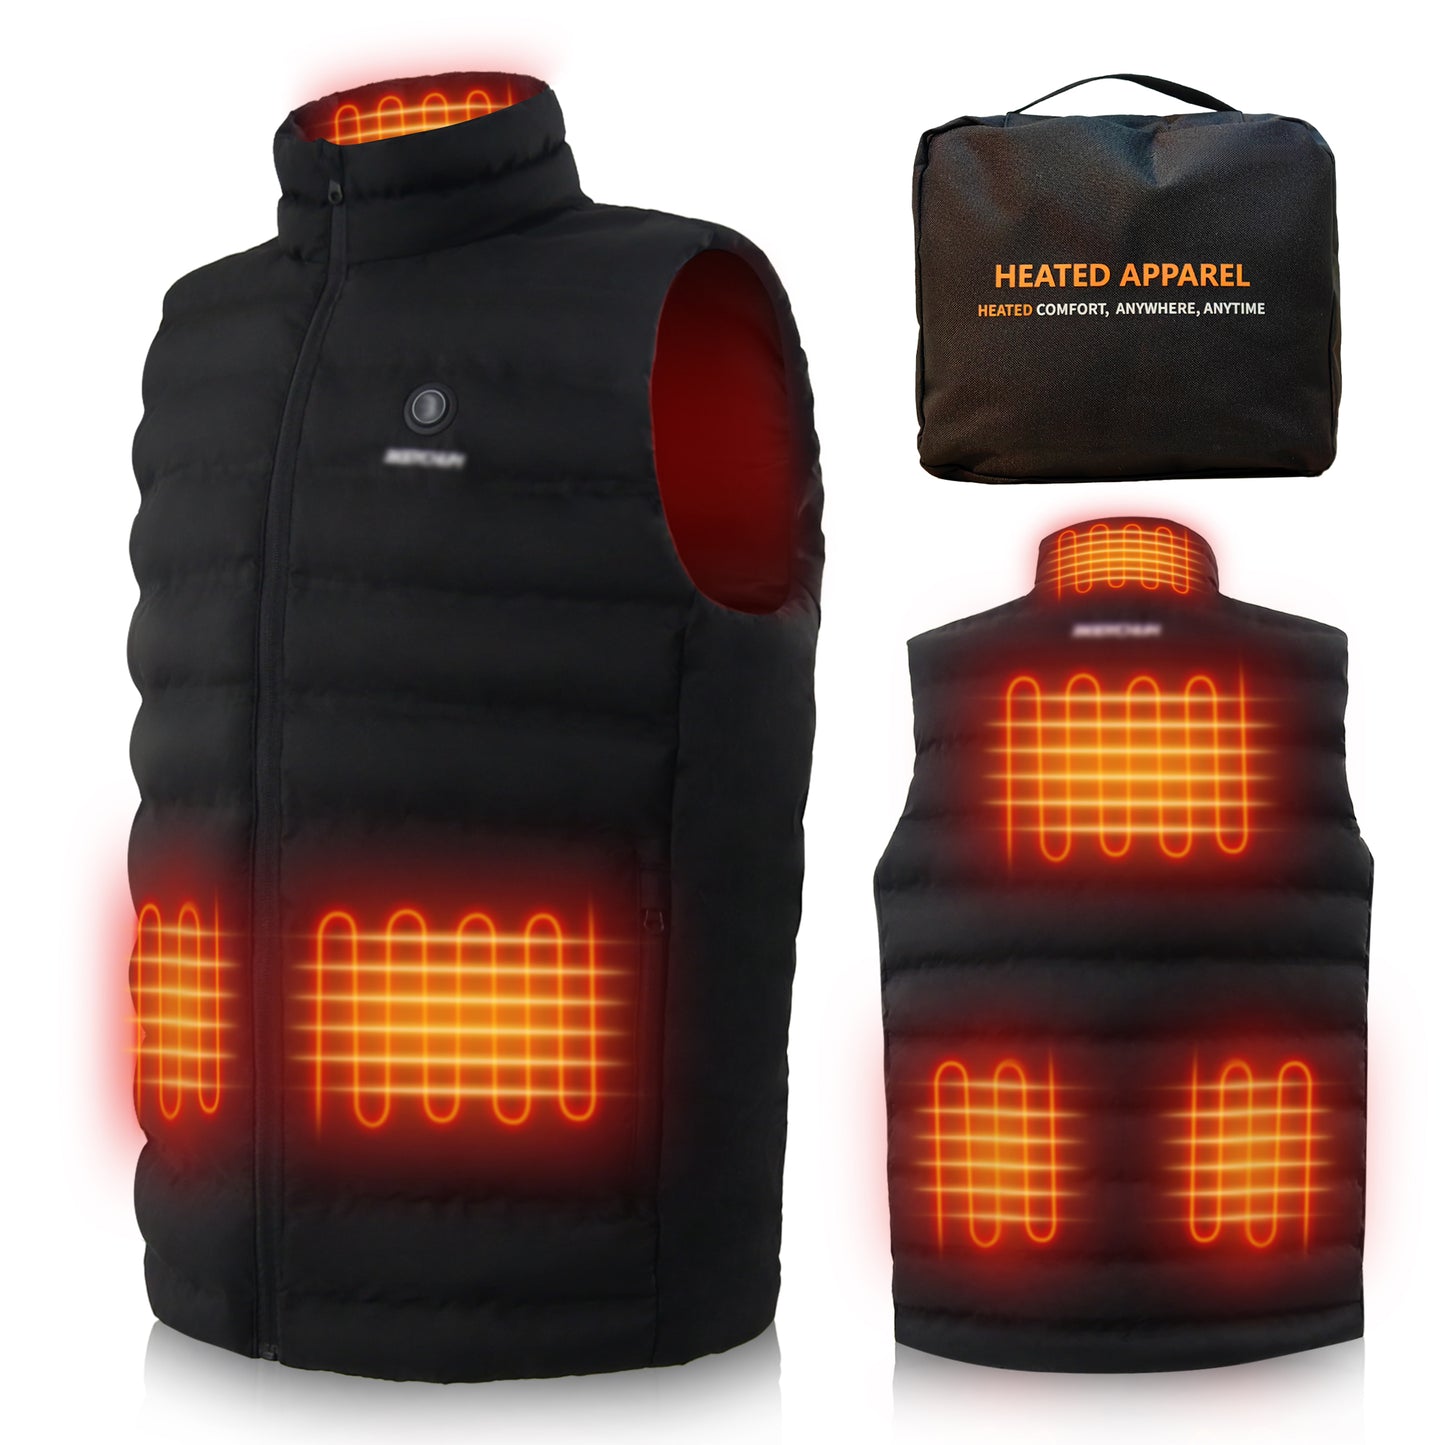 Aptoco Electric Heated Vest for Men Women with USB Charging Battery, 3 Heated Levels 6 Heated Zones Winter Outdoor Heating Jacket for Skiing Hunting, S, Christmas Gifts